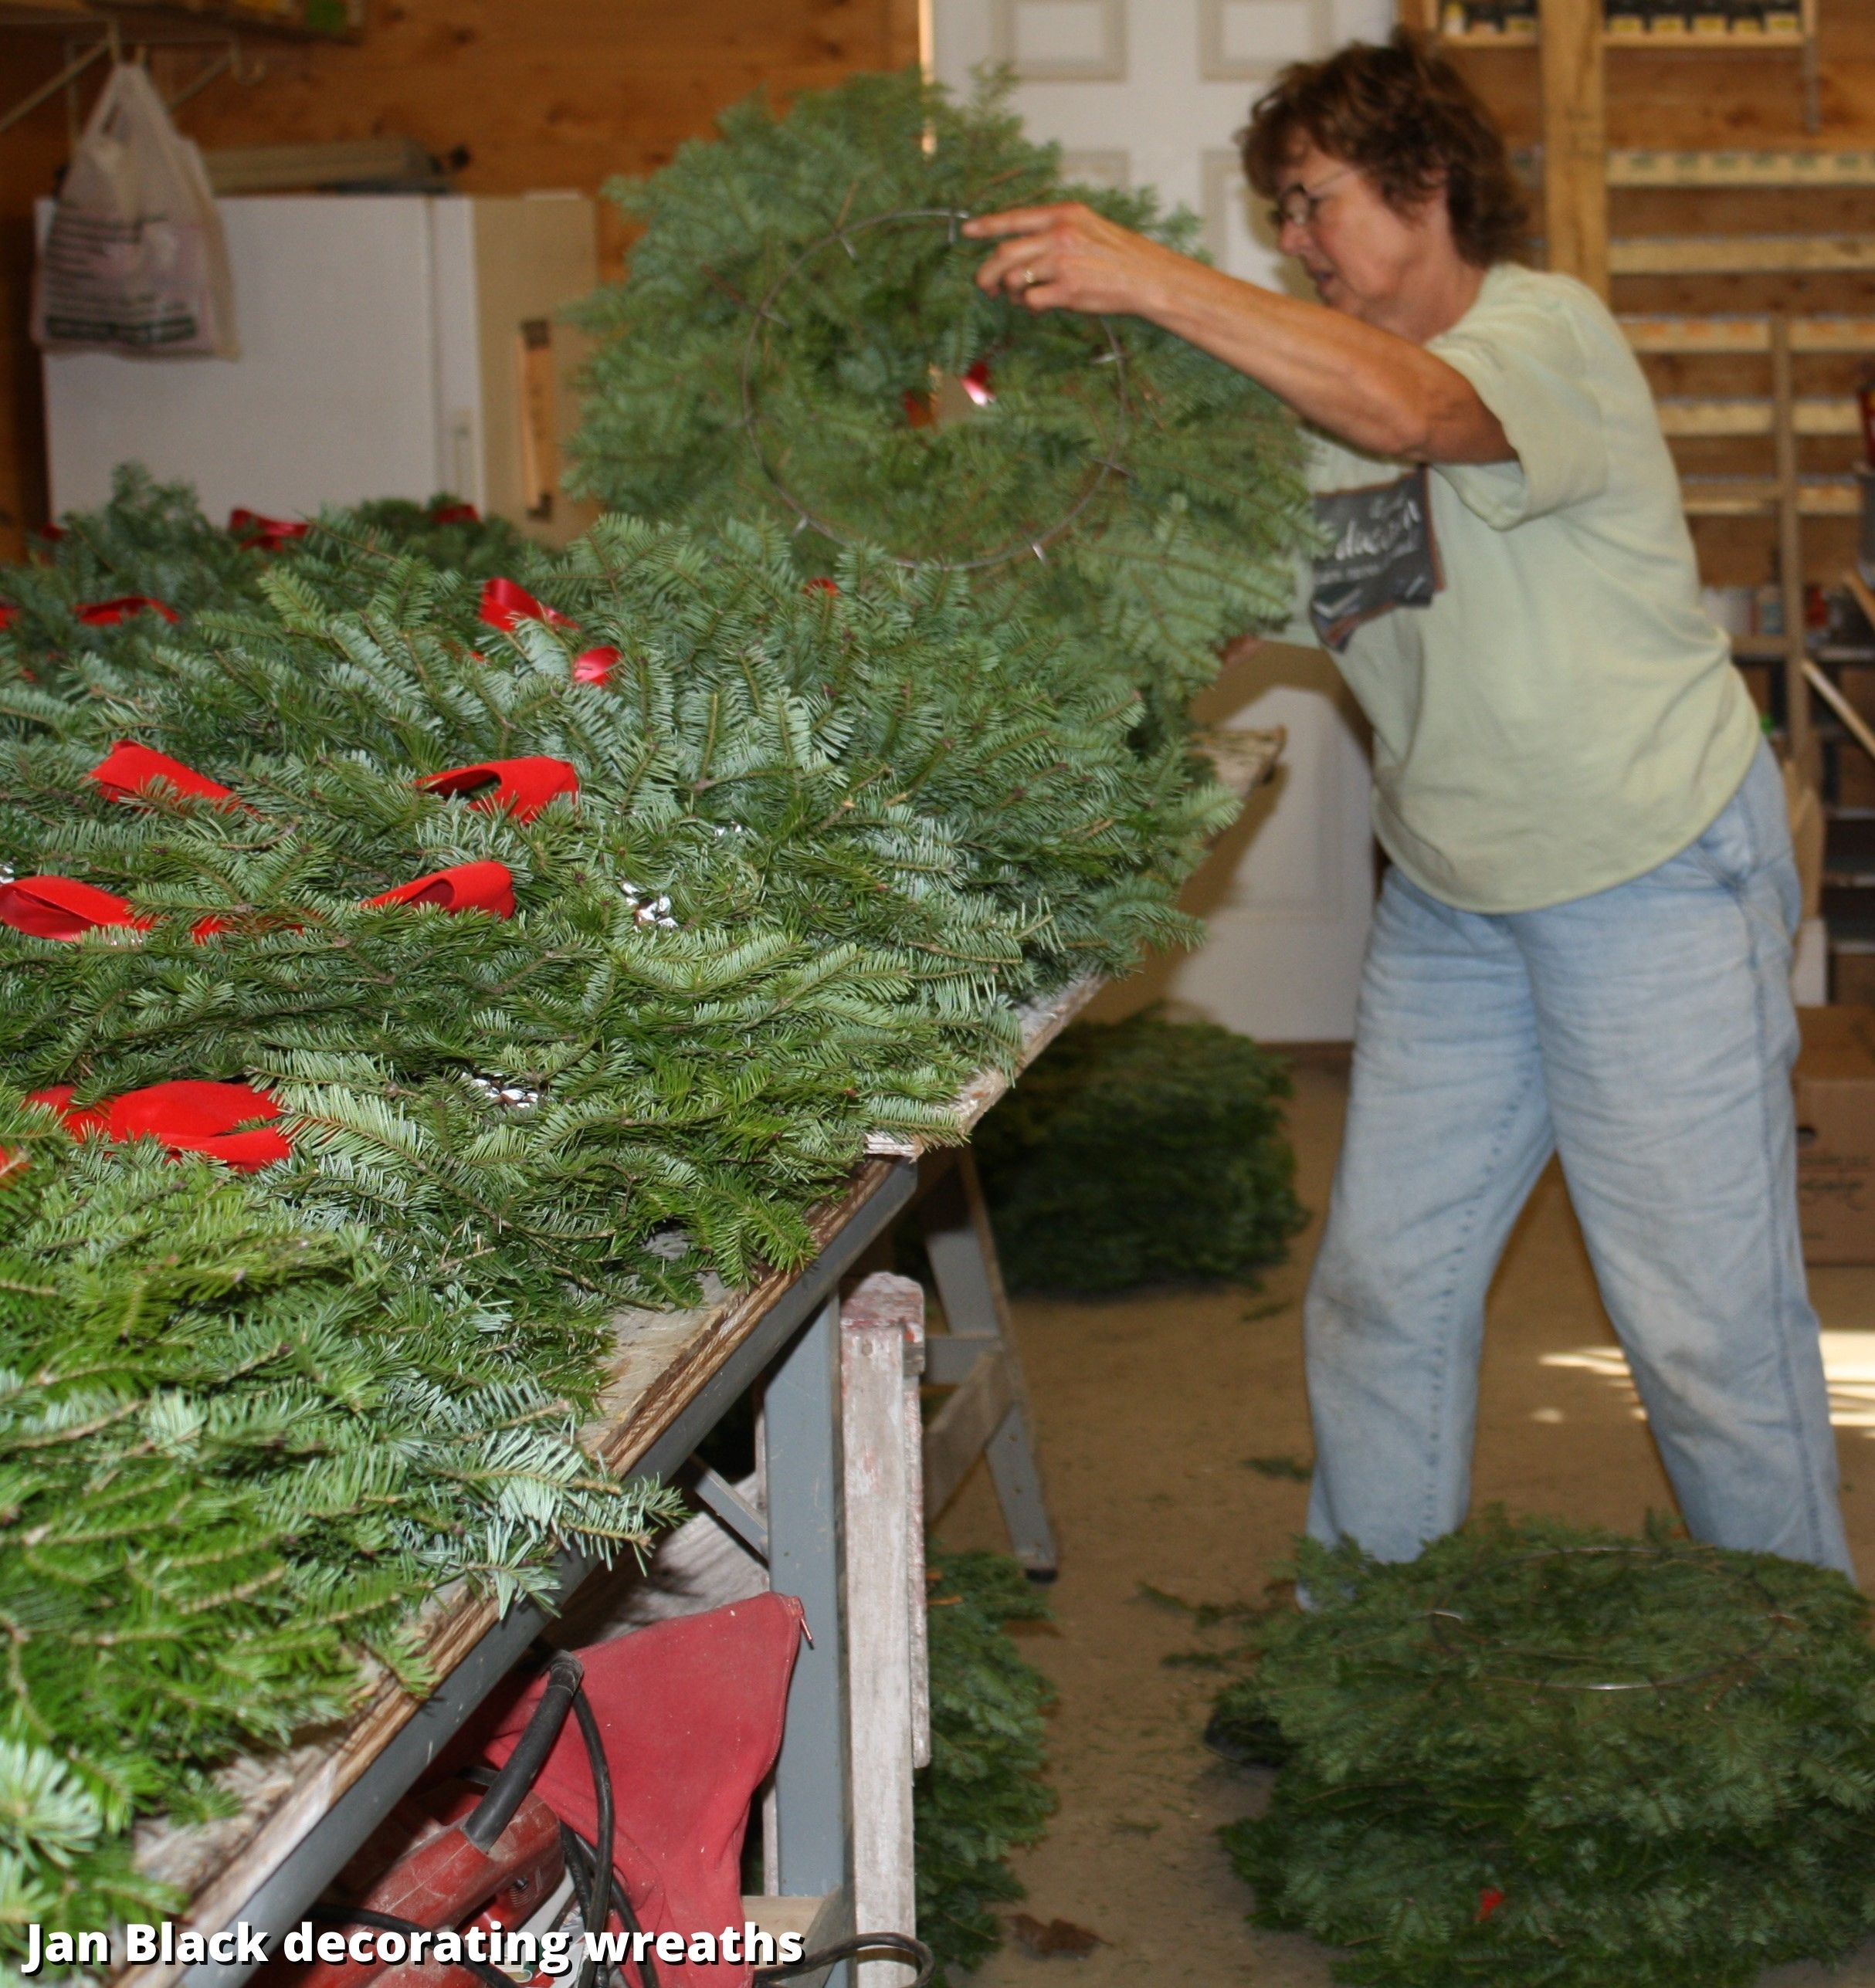 jan with wreaths